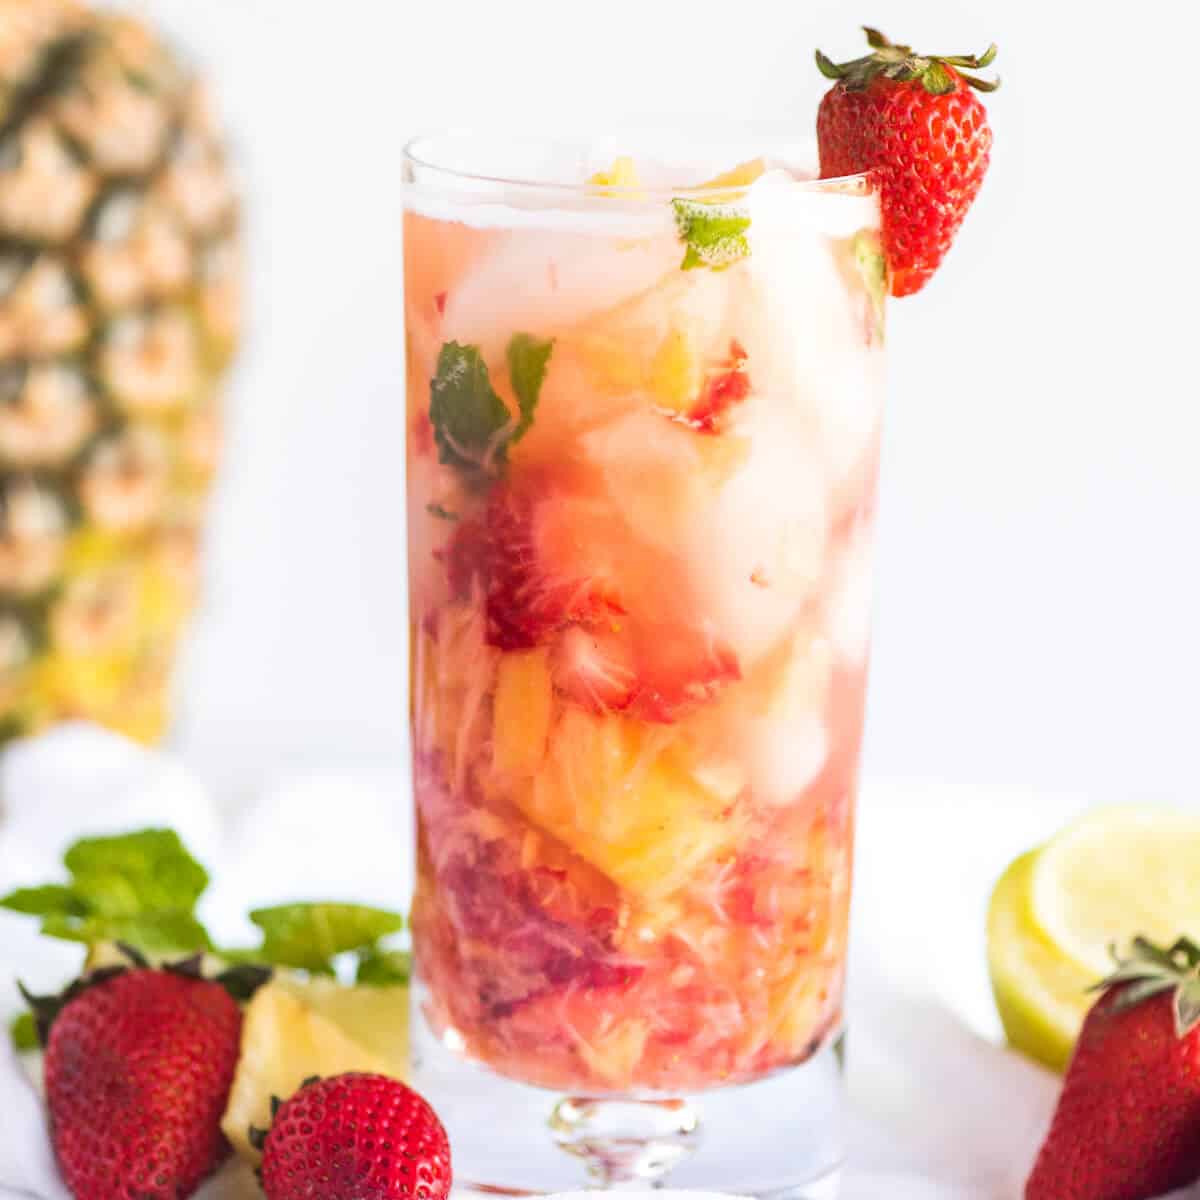 Strawberry Pineapple Mojito in a tall clear glass with ice, garnished with a fresh strawberry.